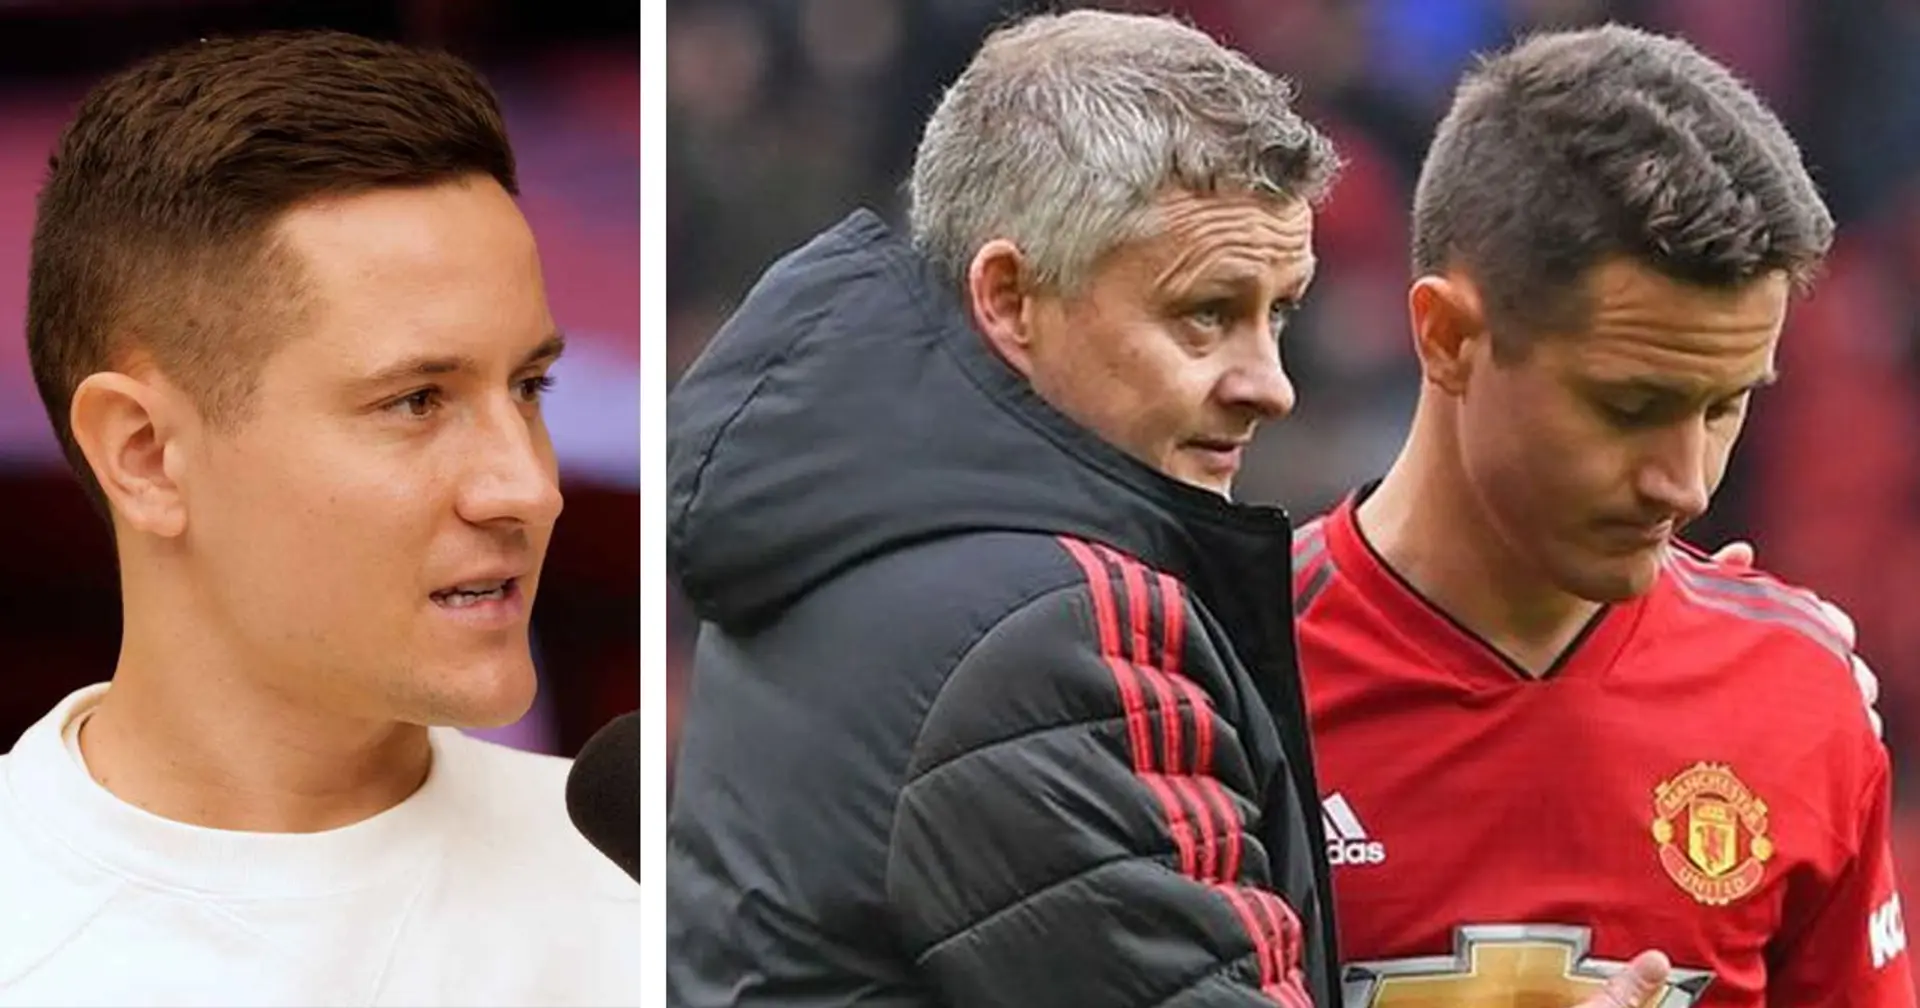 'One of the best people I met in football': Herrera gives honest assessment of Solskjaer’s time as United manager